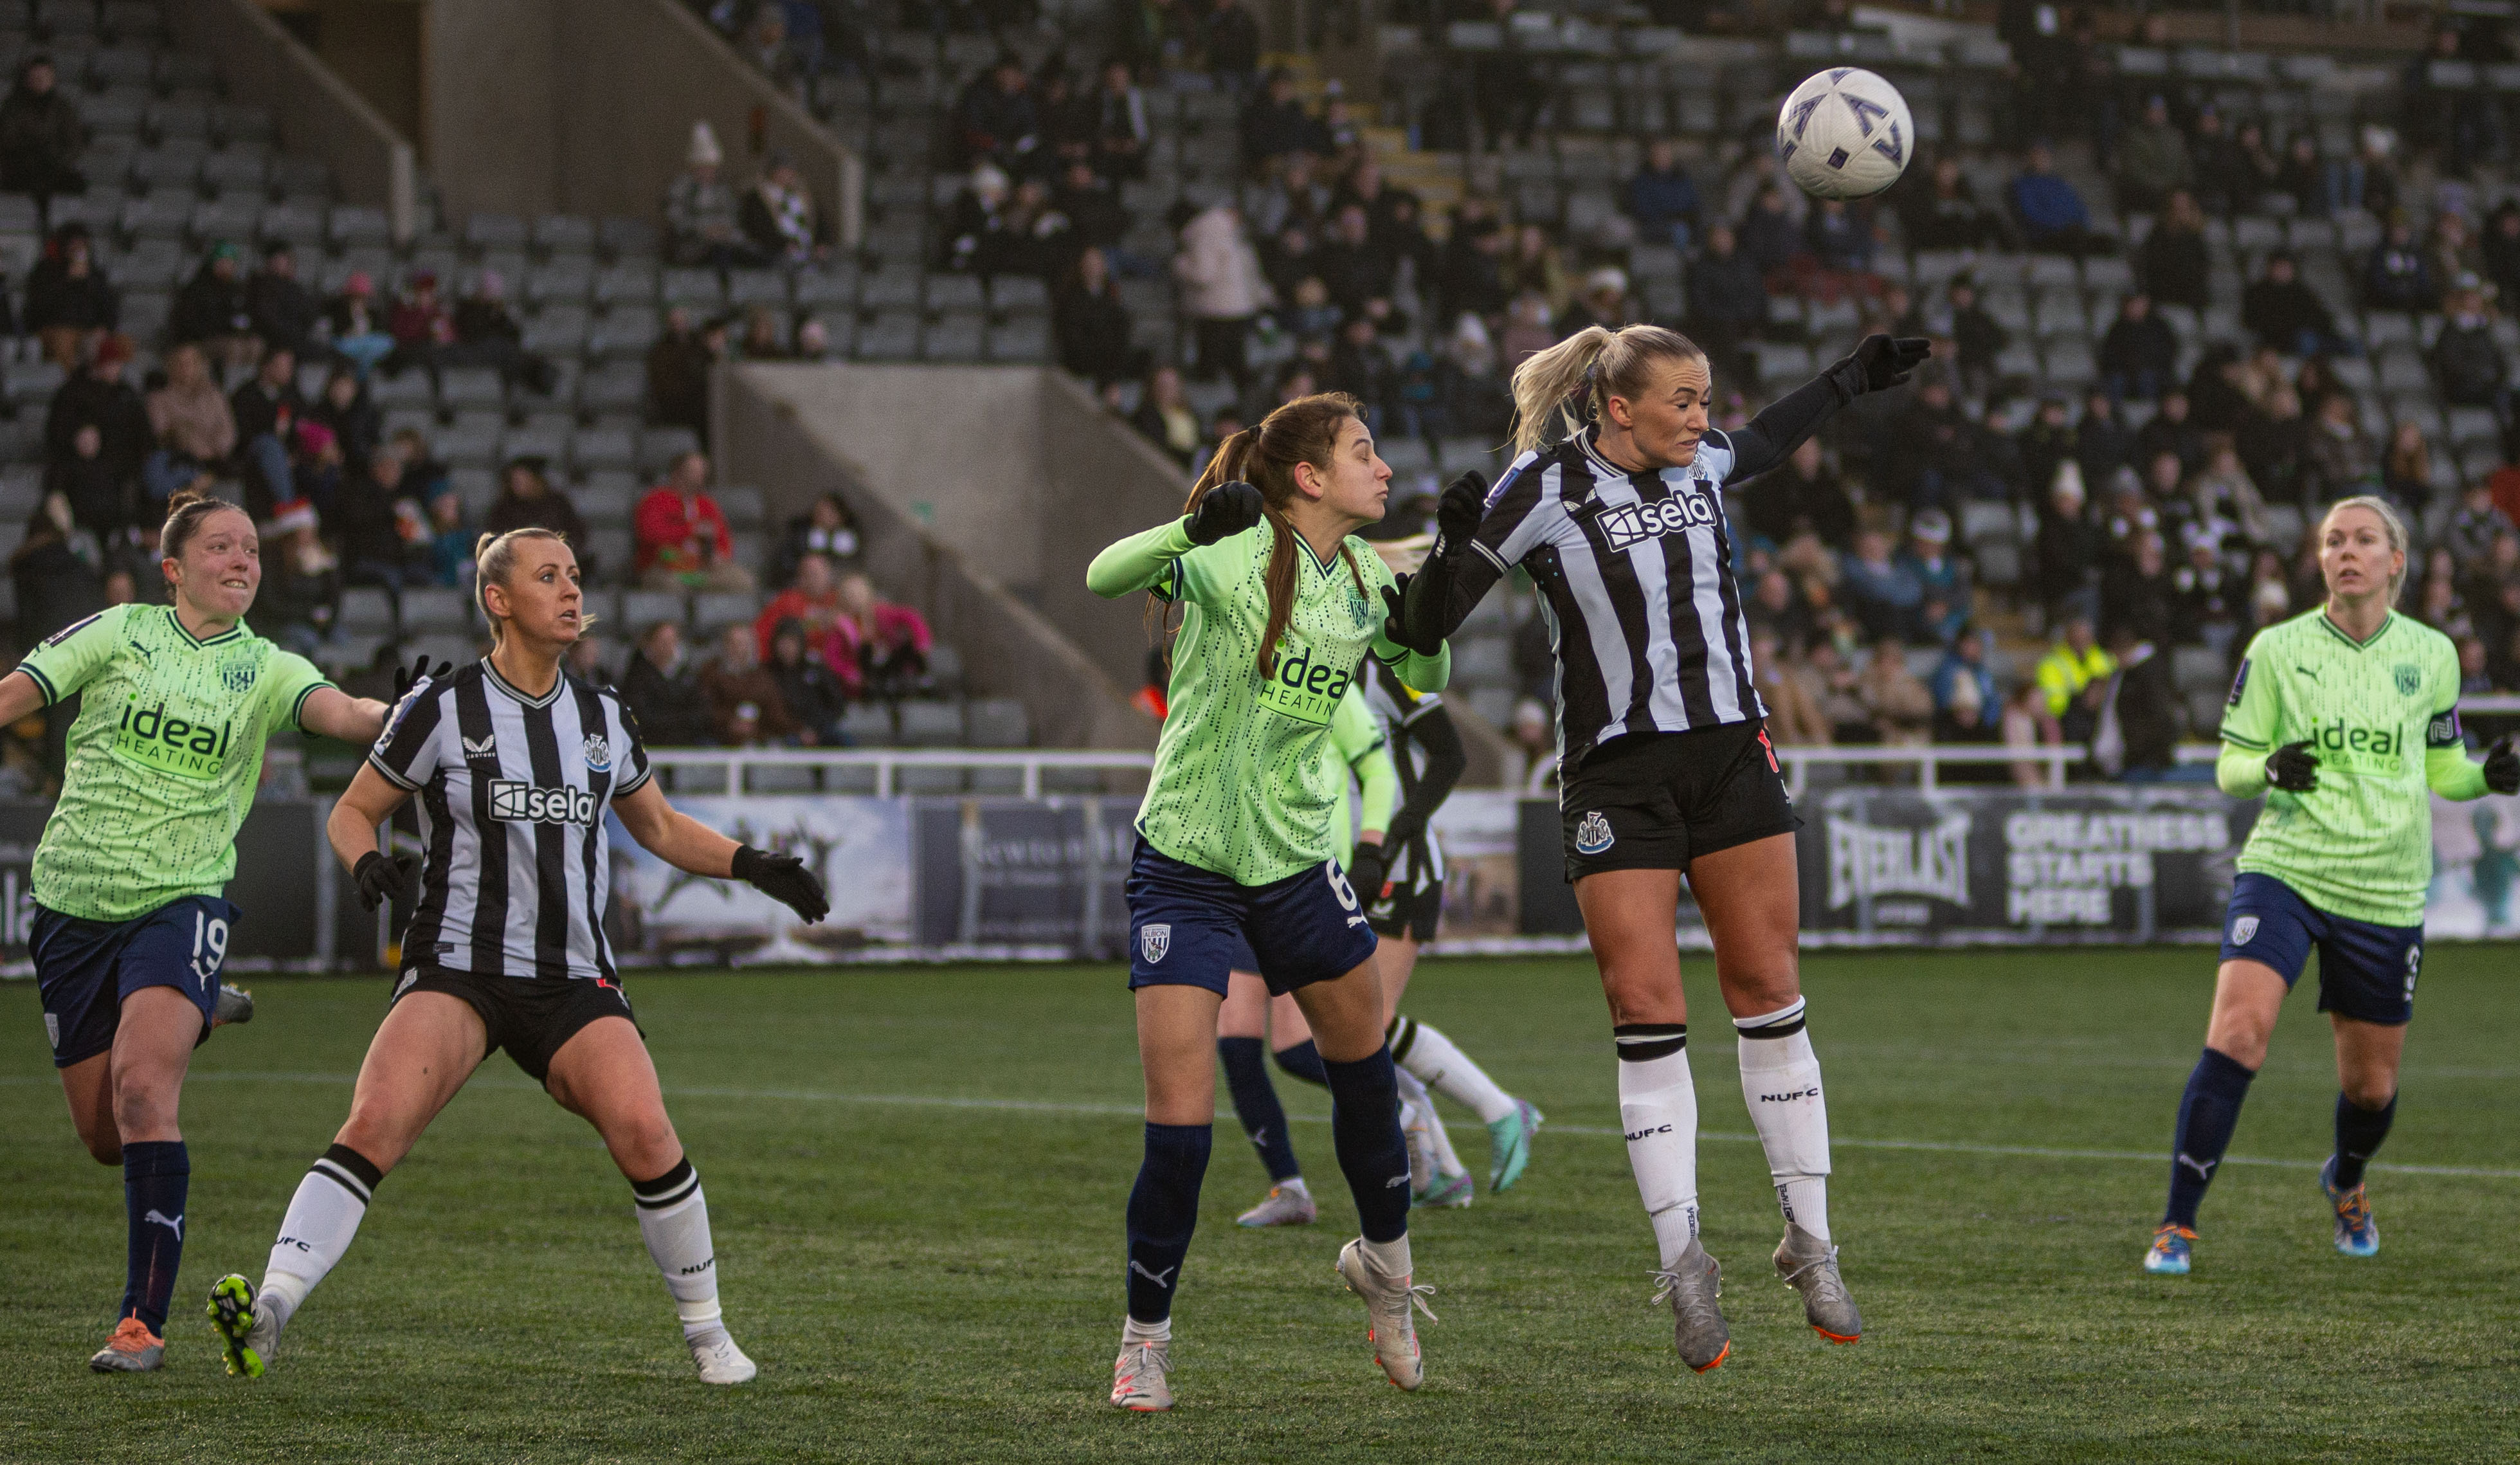 Albion Women in action against Newcastle earlier this season.